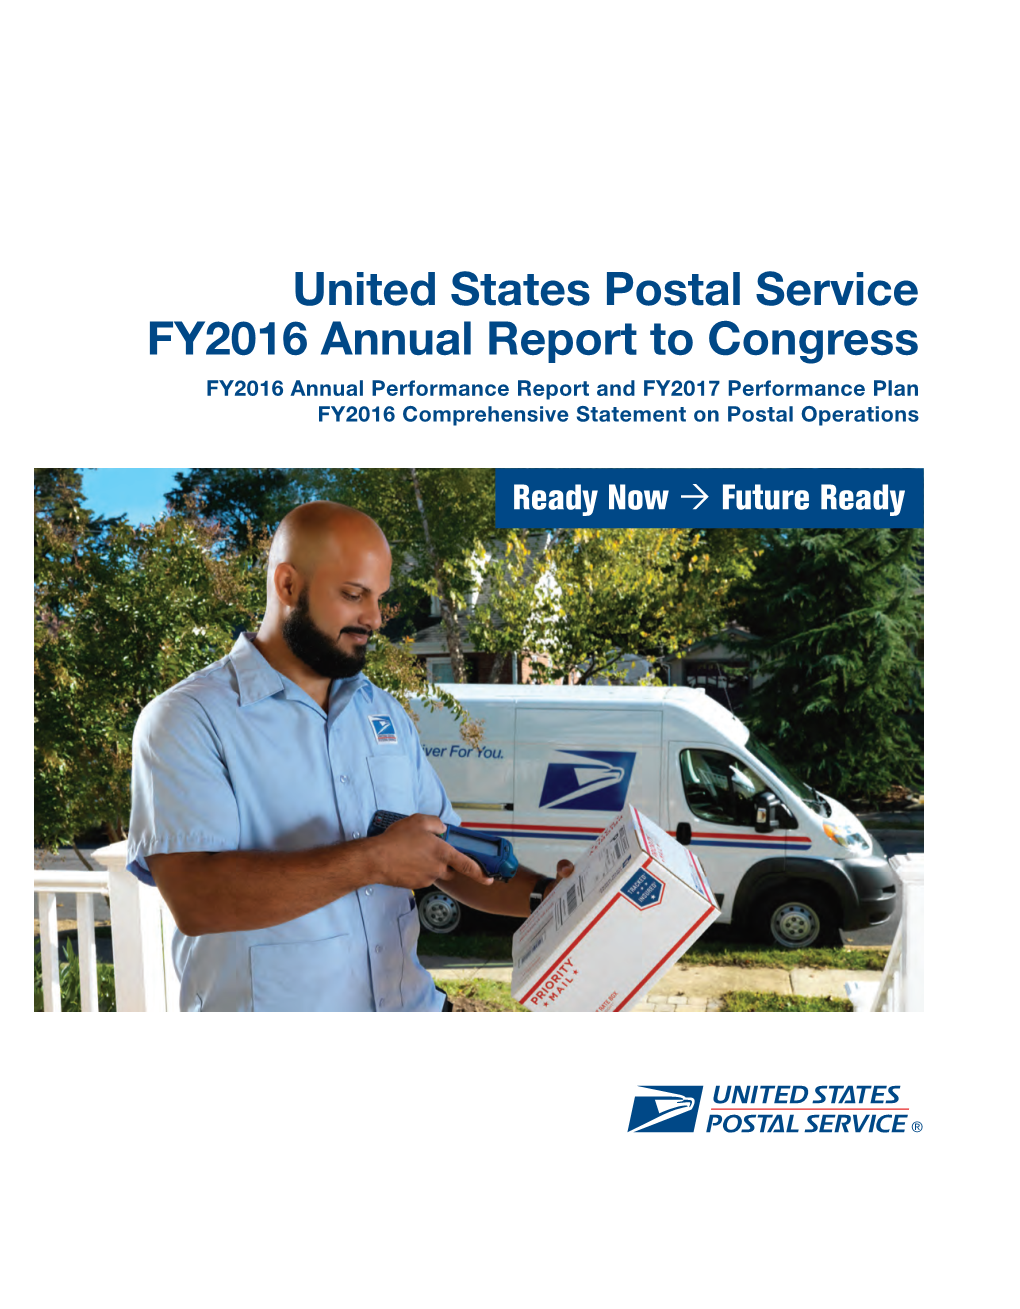 United States Postal Service FY2016 Annual Report to Congress